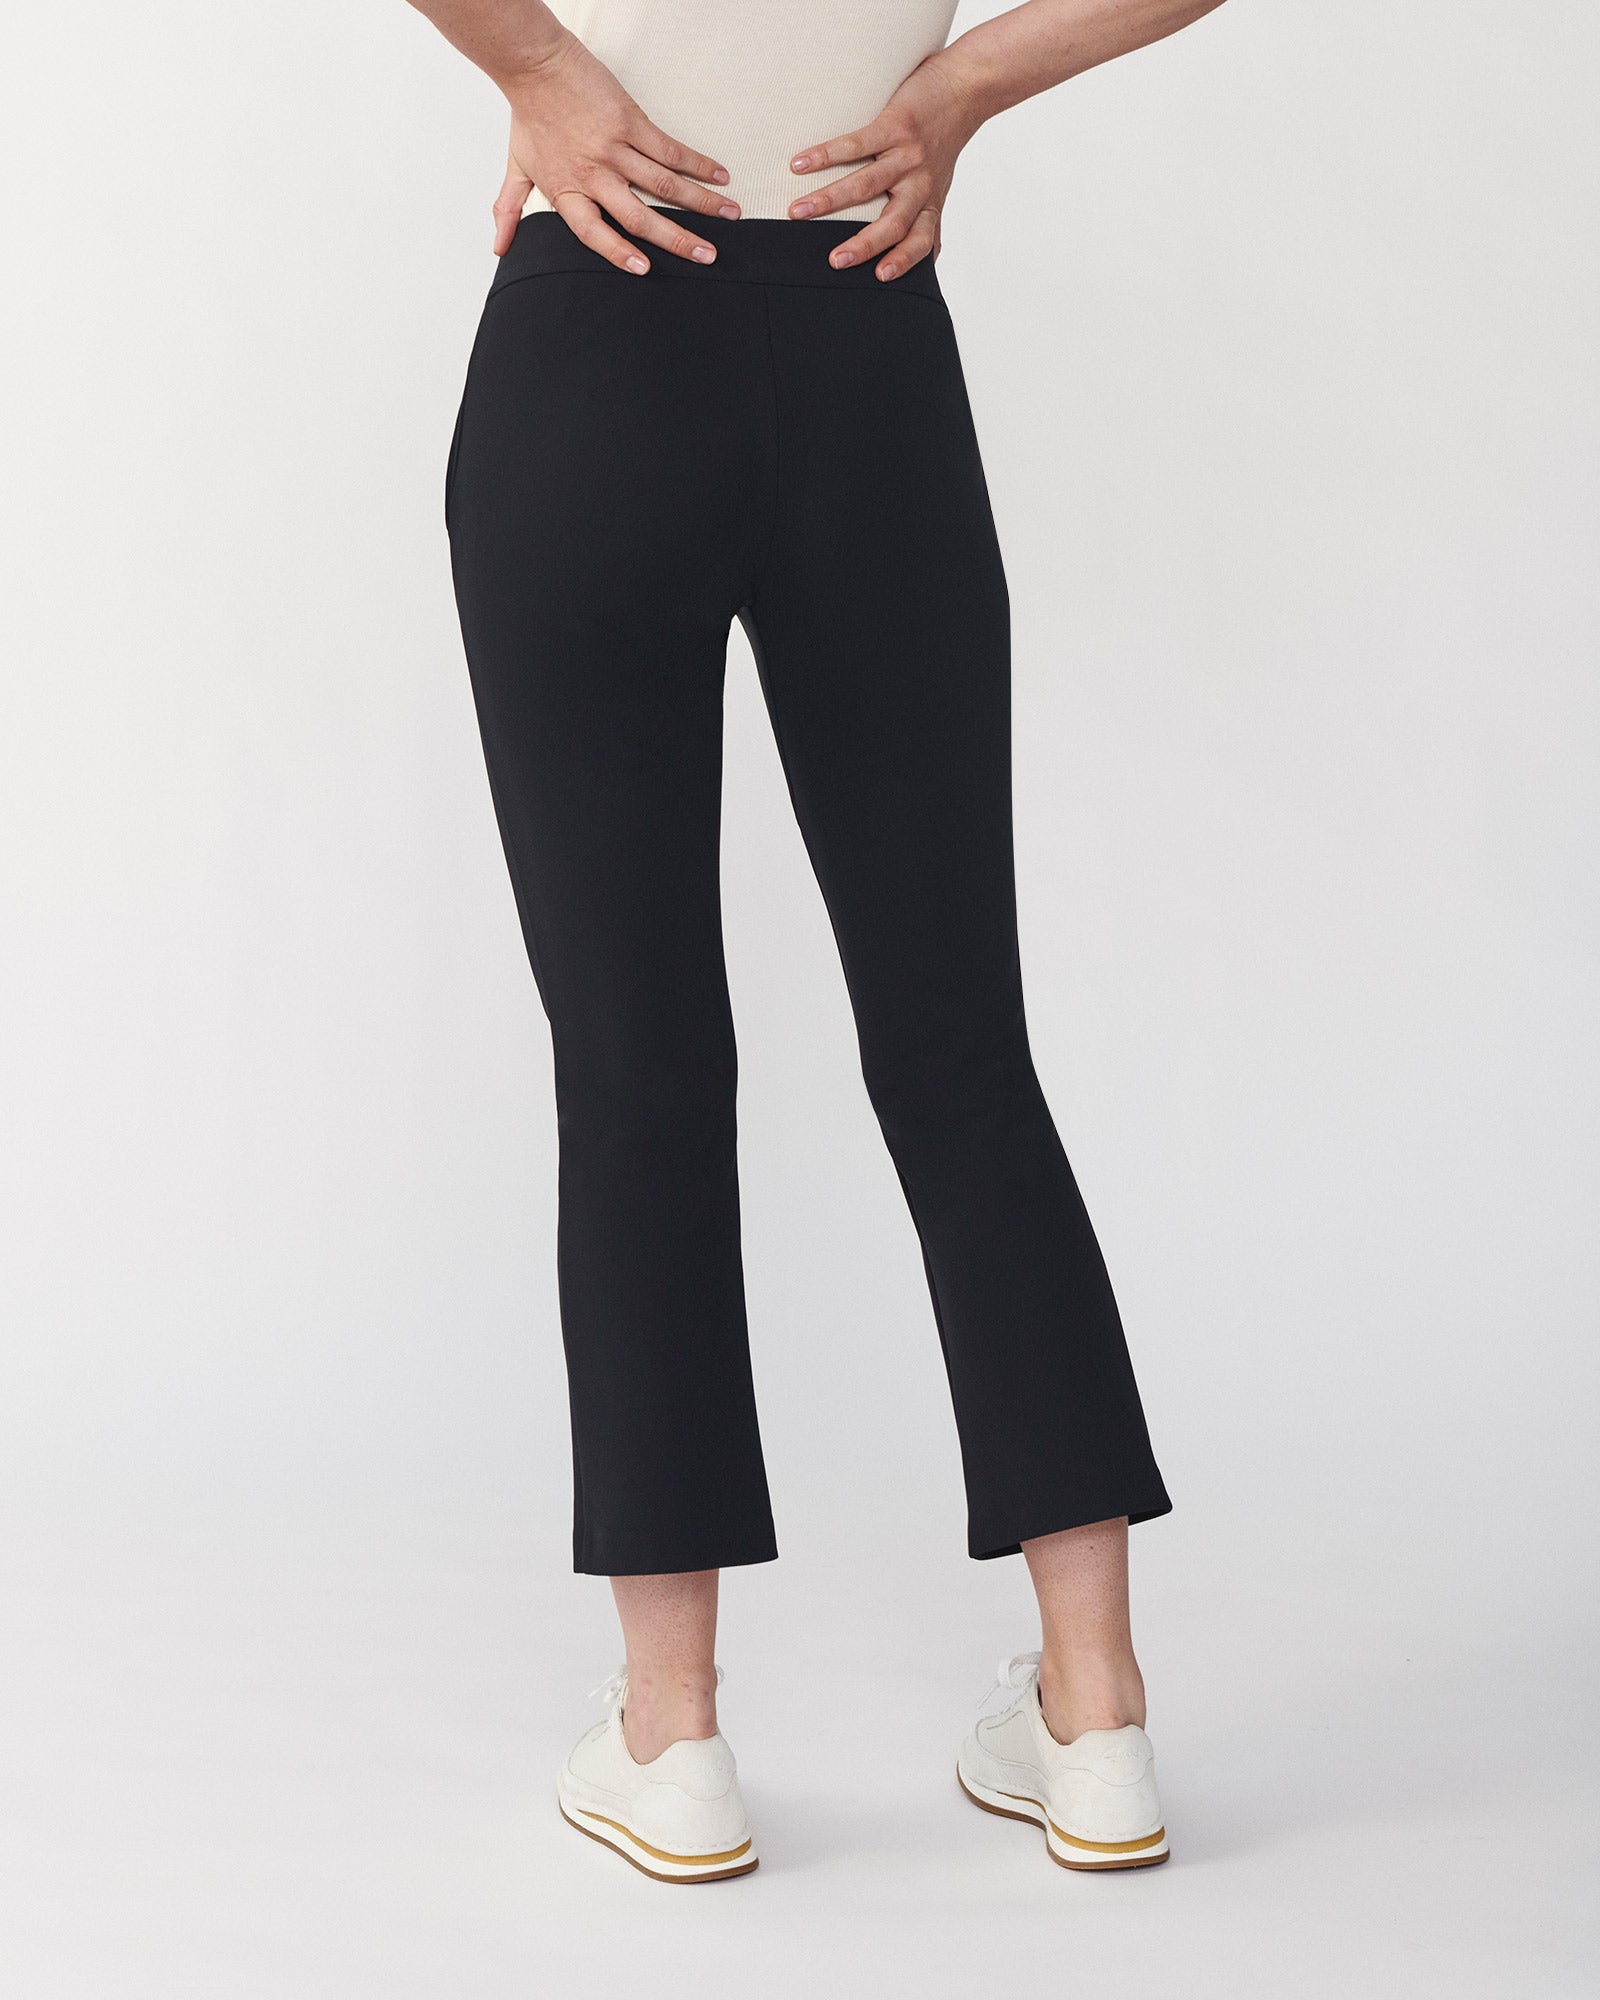 Flare Game Trousers Black 2.0